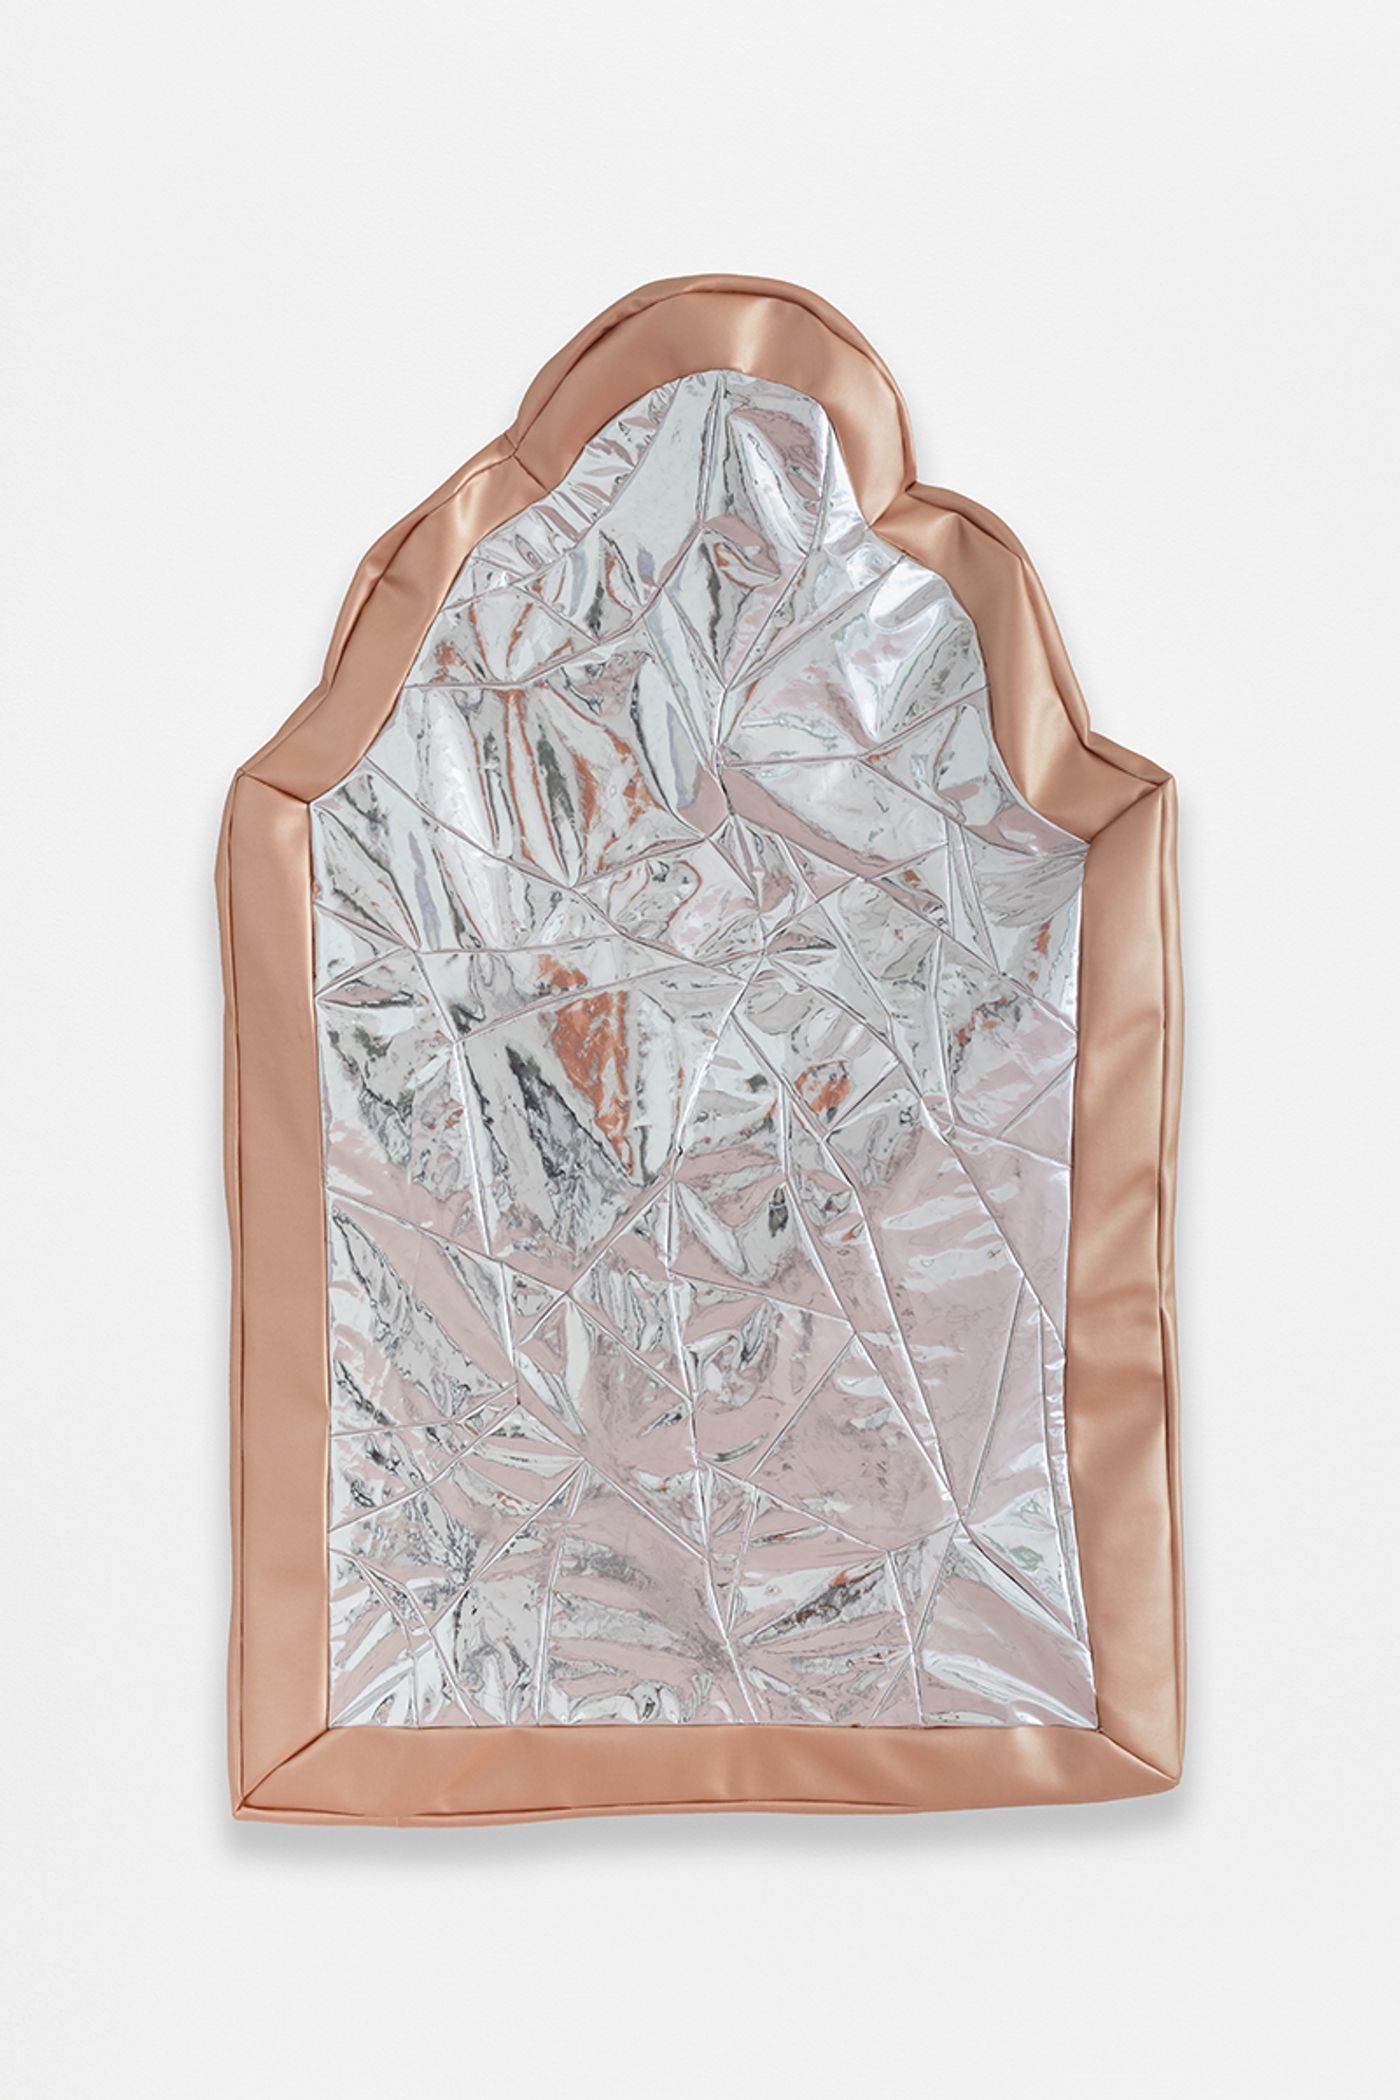 Image of Soft Cracked Rose Gold Mirror, 2023: Vinyl and upholstery foam